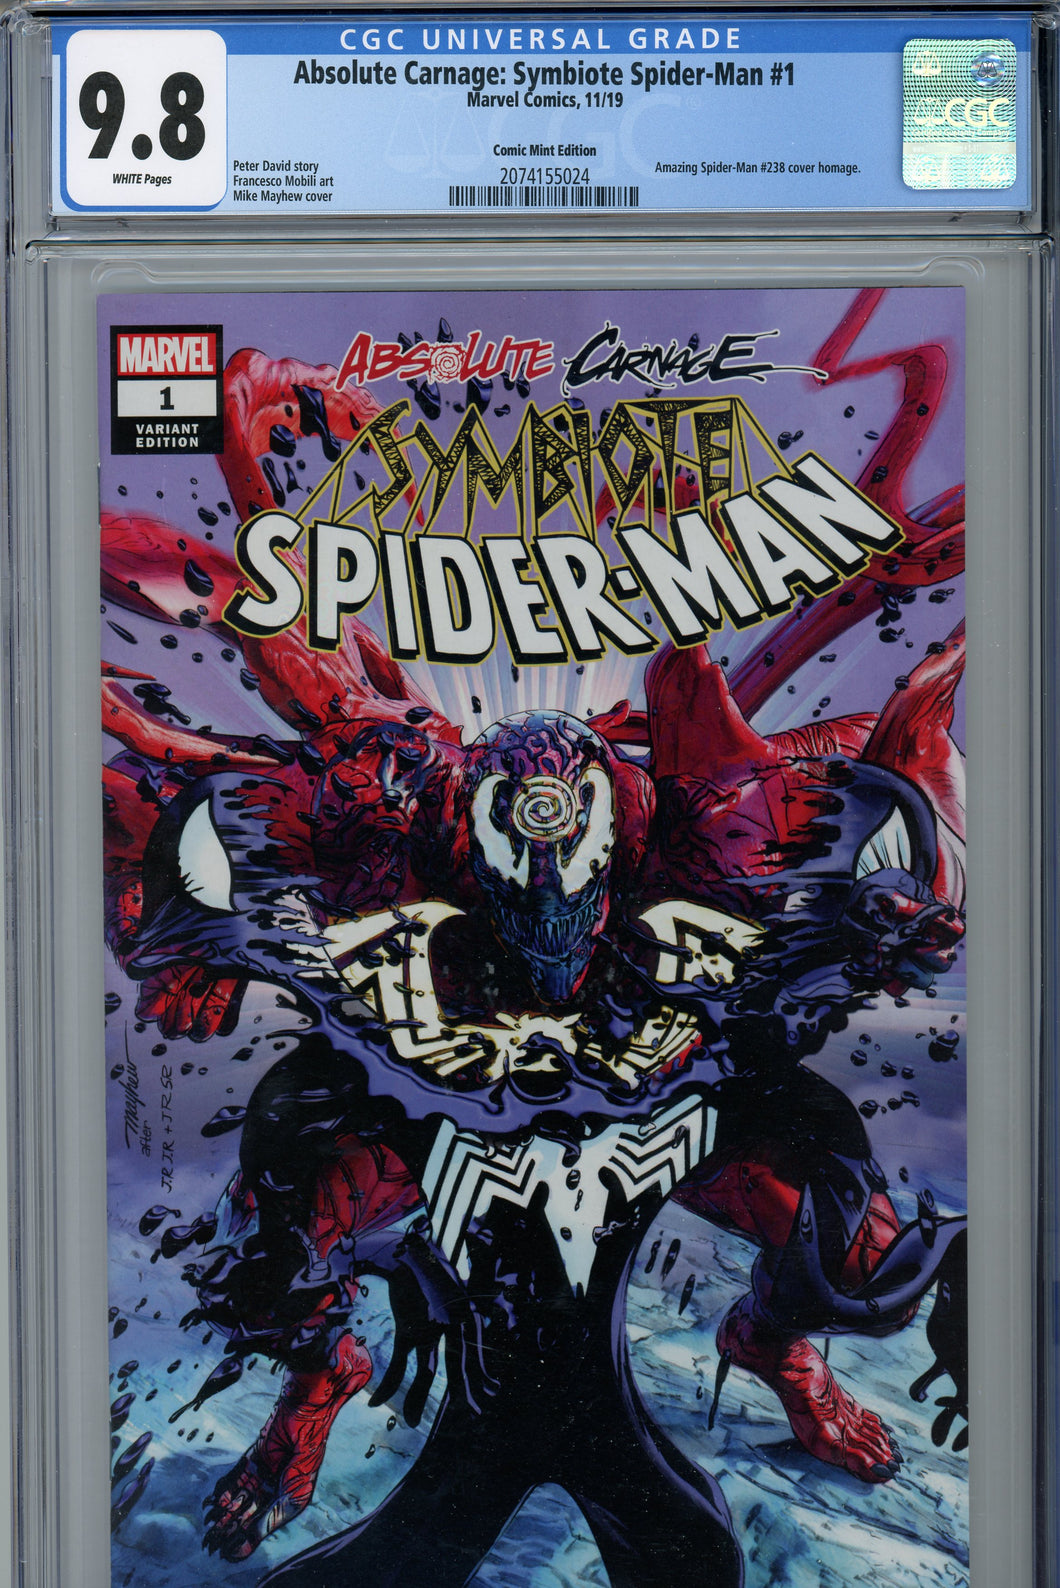 Absolute Carnage: Symbiote Spider-Man #1 CGC 9.8 Comic Mint Edition